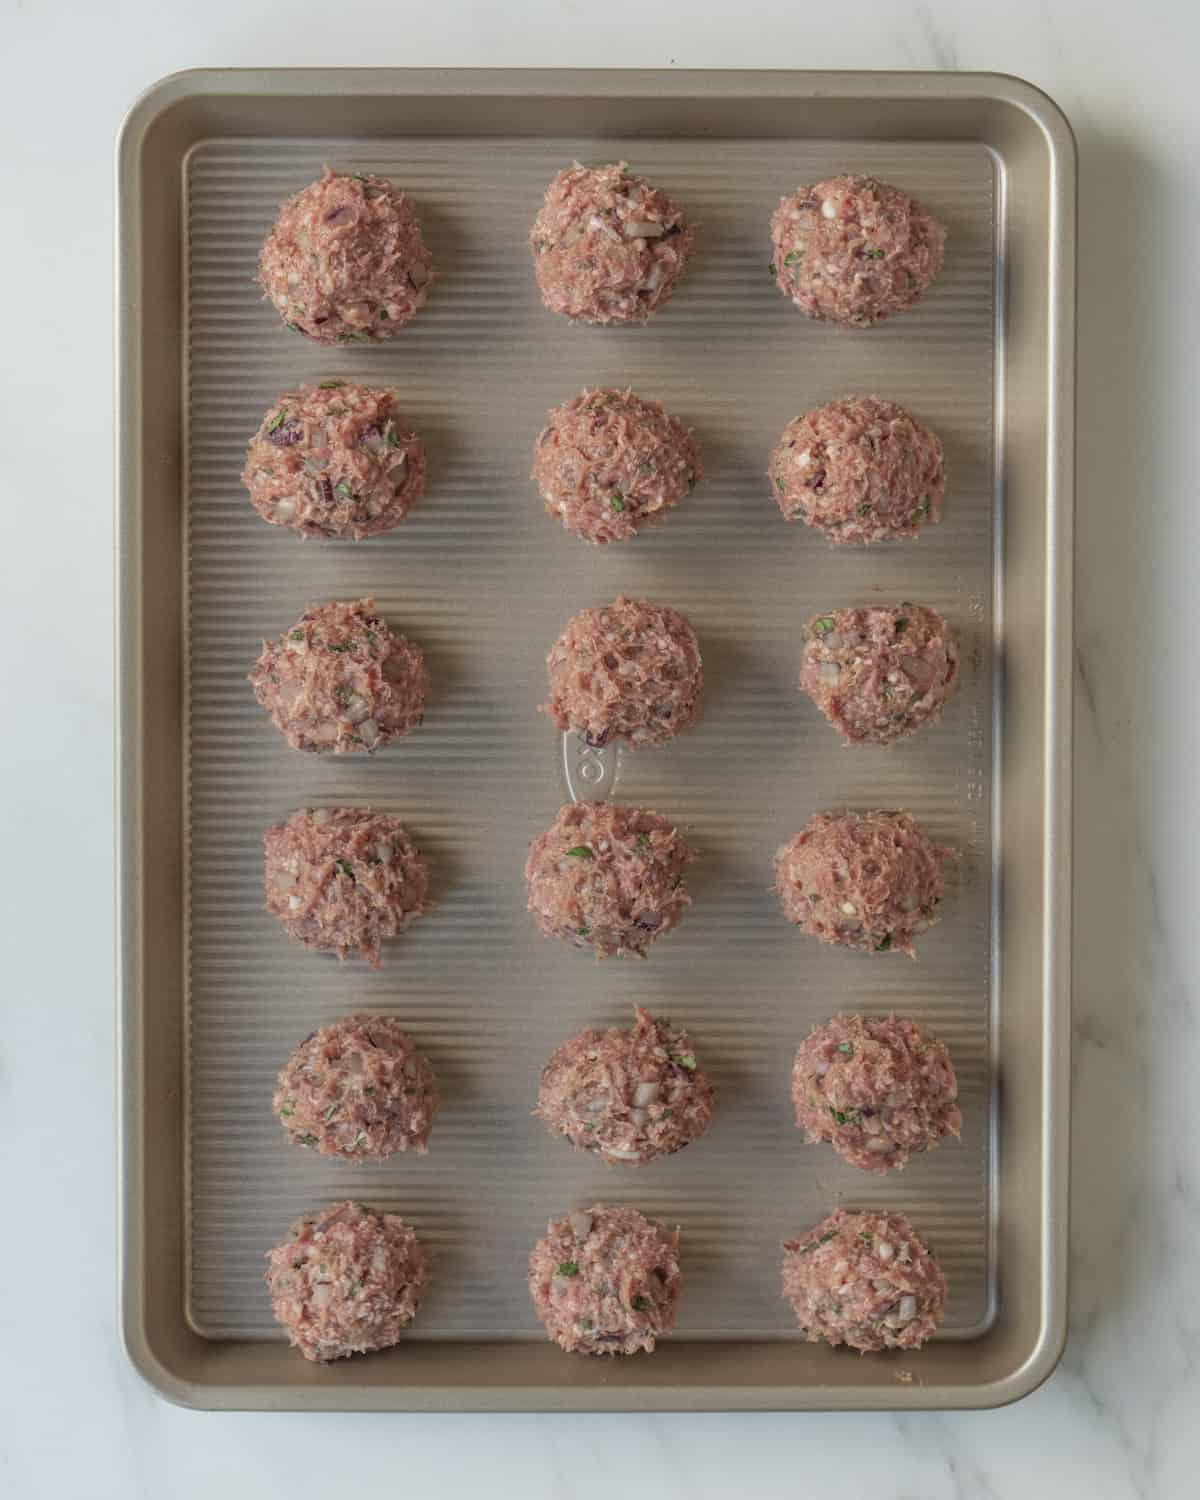 Uncooked meatballs lined on a metal sheet pan.